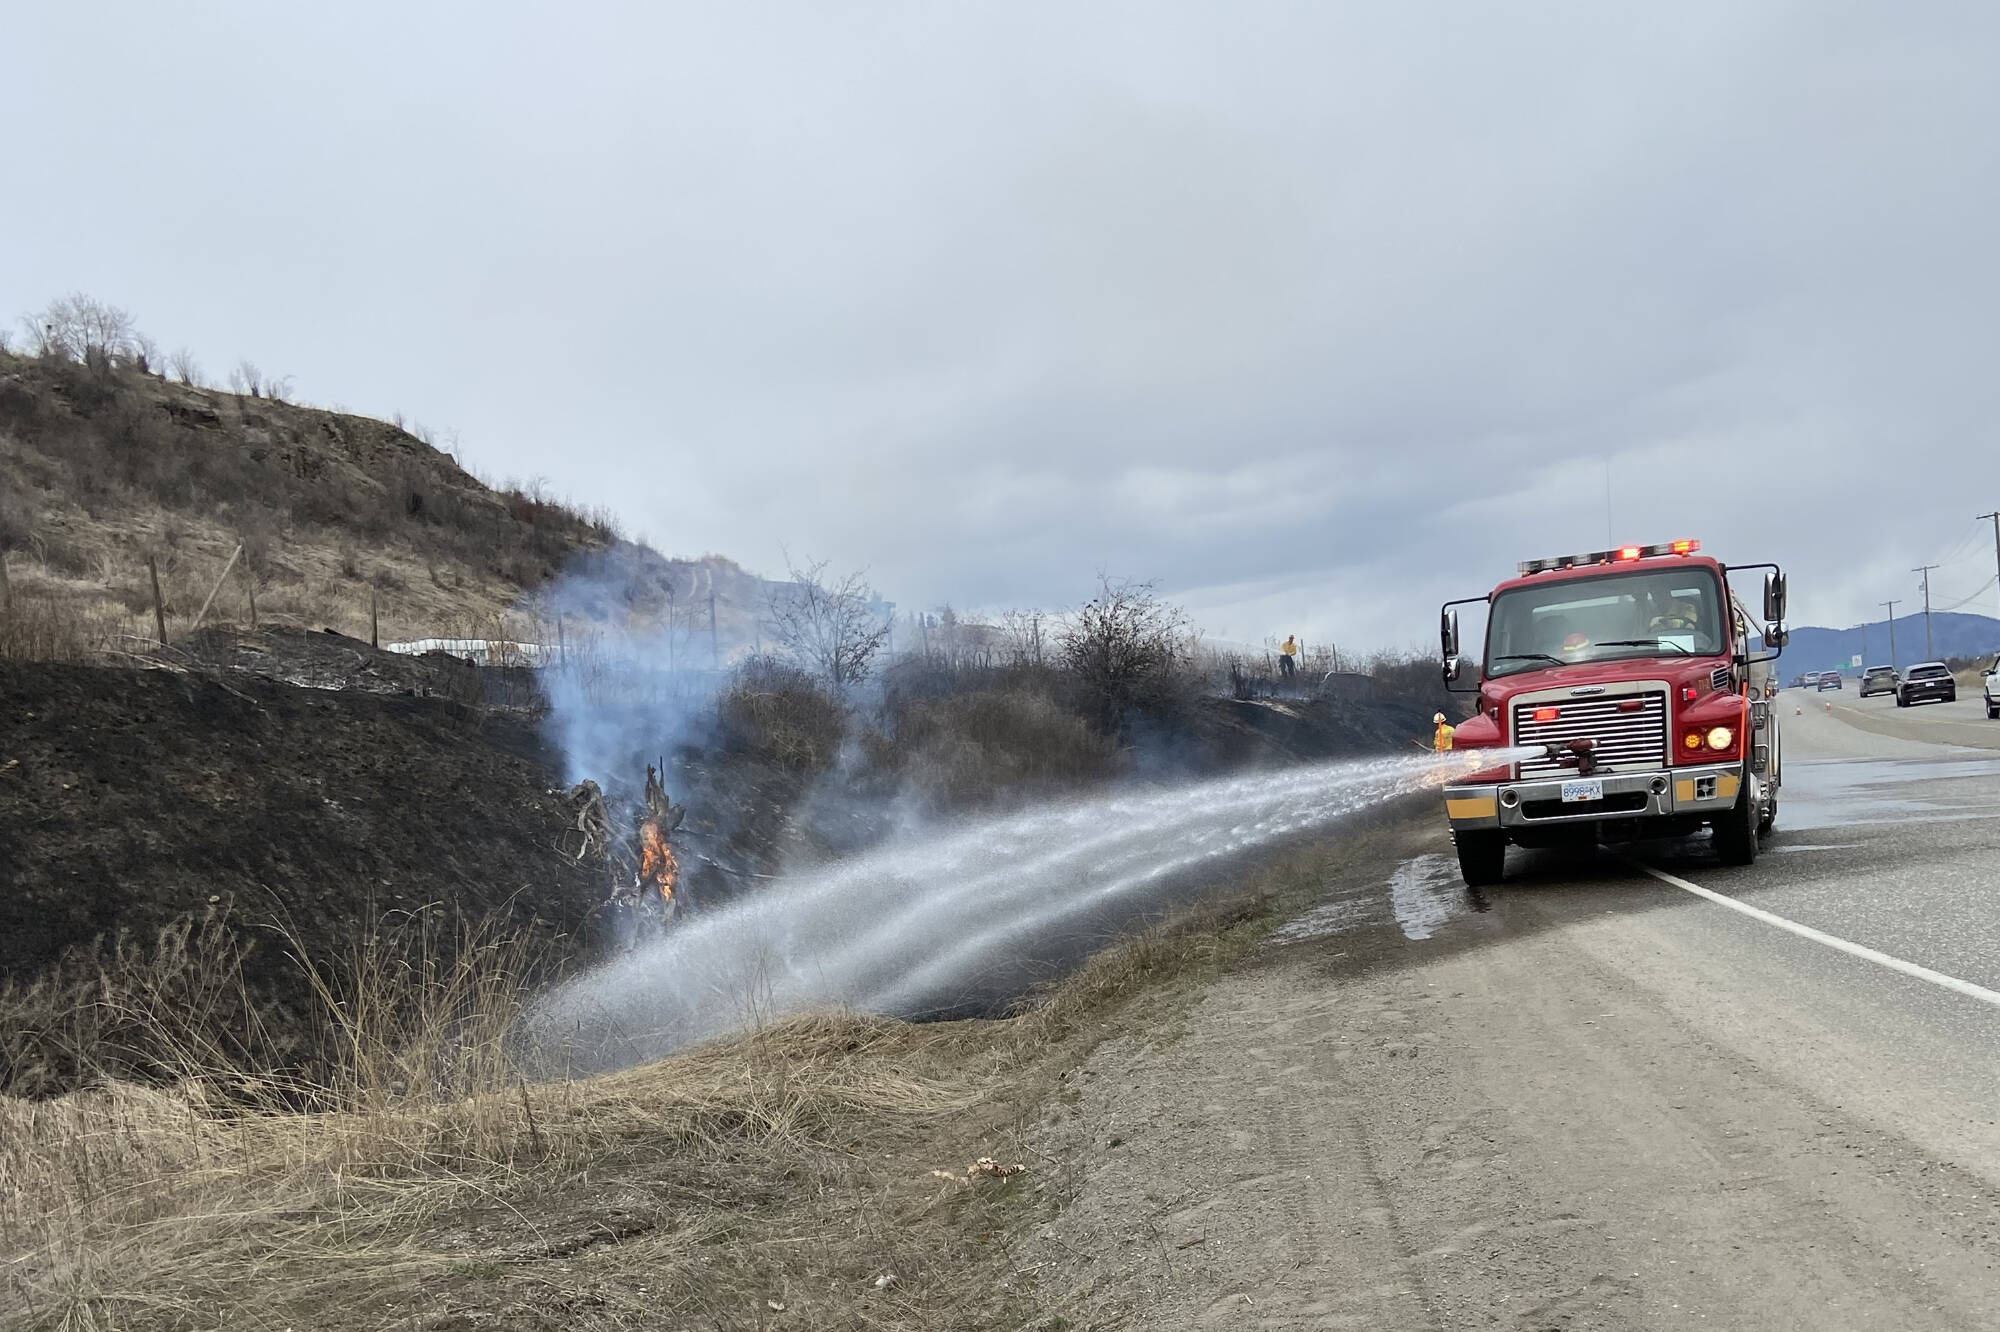 The Armstrong Spallumcheen Fire Department extinguished a 300-foot grass fire just north of the intersection of Old Kamloops Road and Highway 97 Friday, March 31, 2023. (David Evans photo)